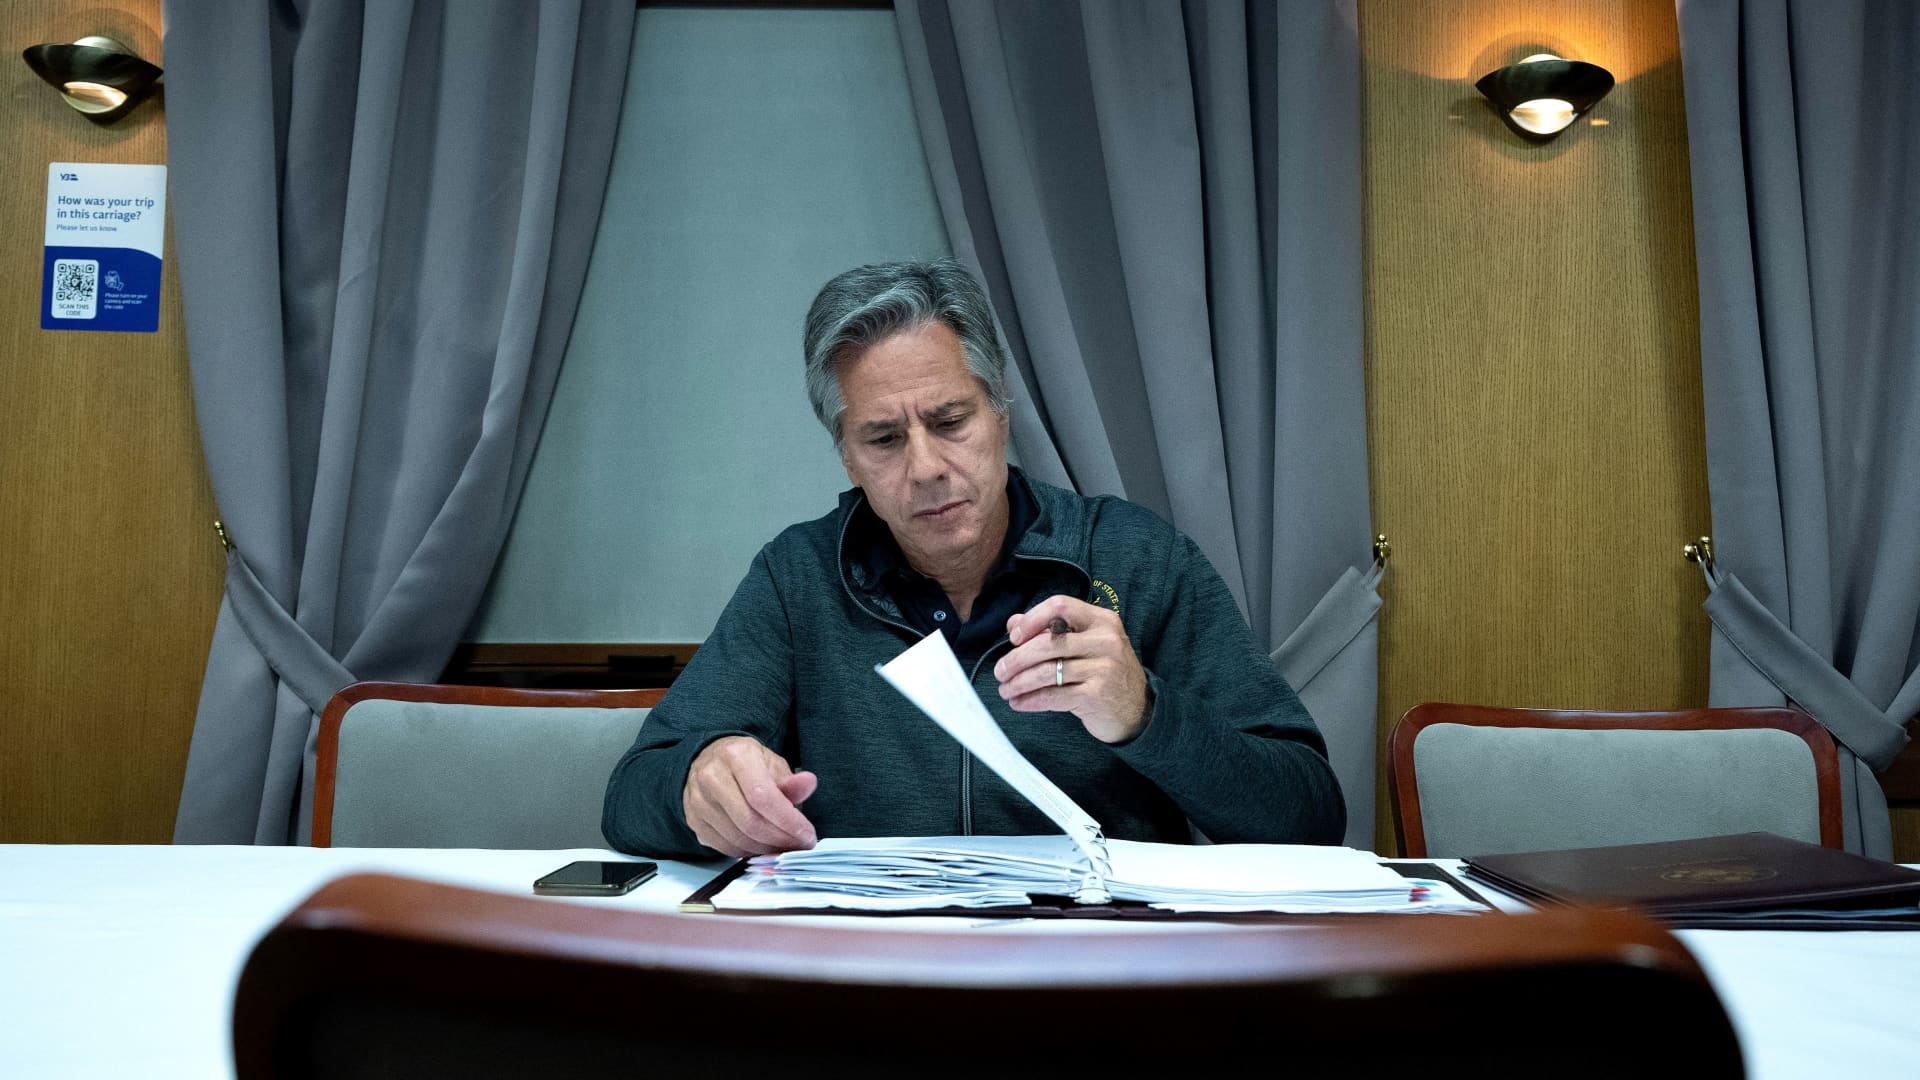 U.S. Secretary of State Antony Blinken works while traveling by train to Kyiv on September 6, 2023. Blinken arrived in Kyiv on an unannounced visit and is due to announce more than a billion dollars in fresh aid to Ukraine.